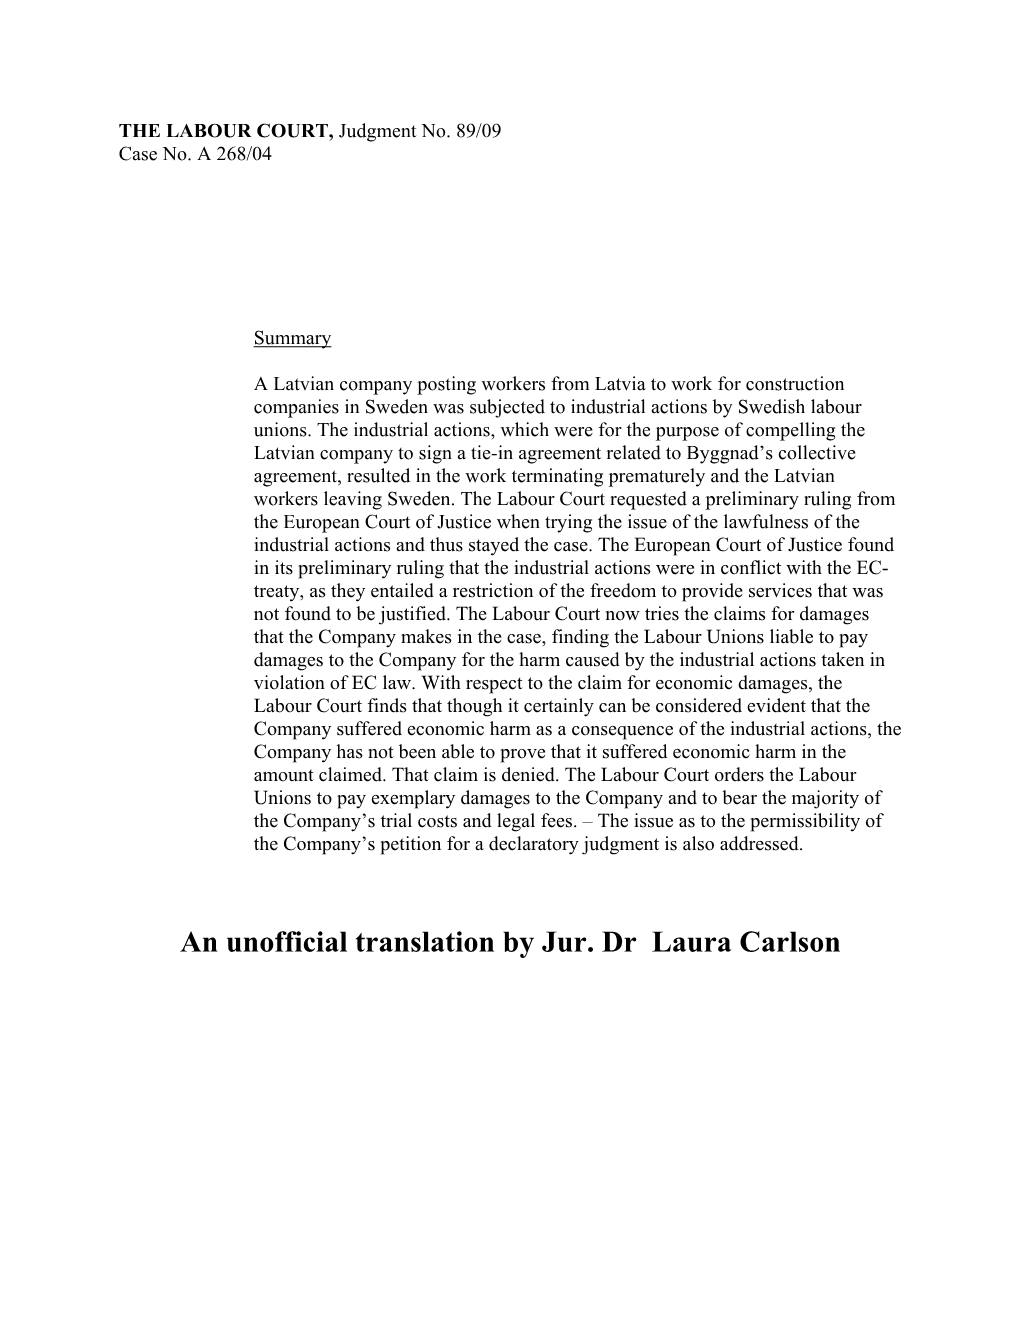 An Unofficial Translation by Jur. Dr Laura Carlson